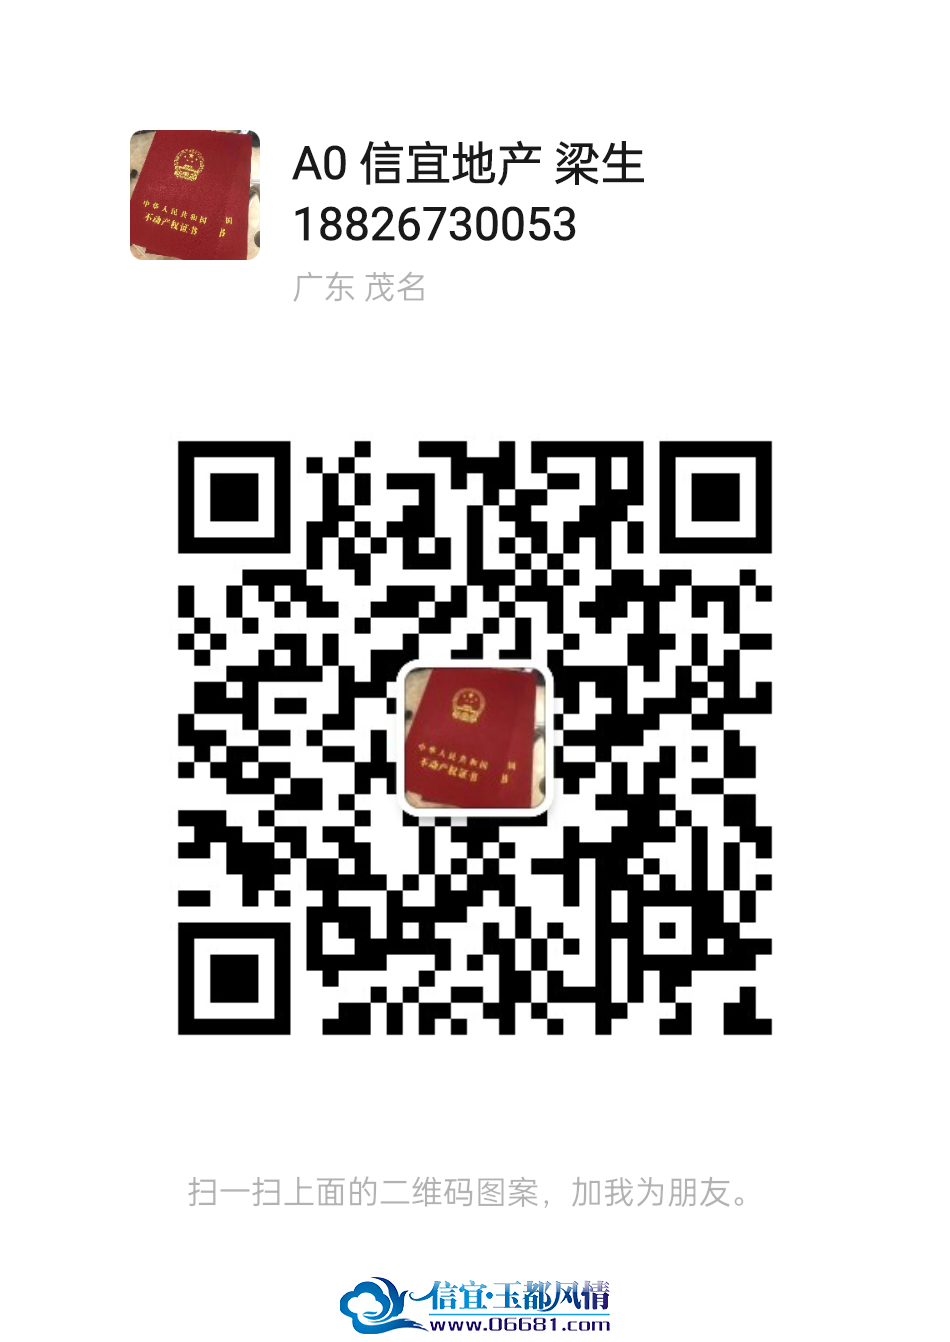 mmqrcode1694657645805.png